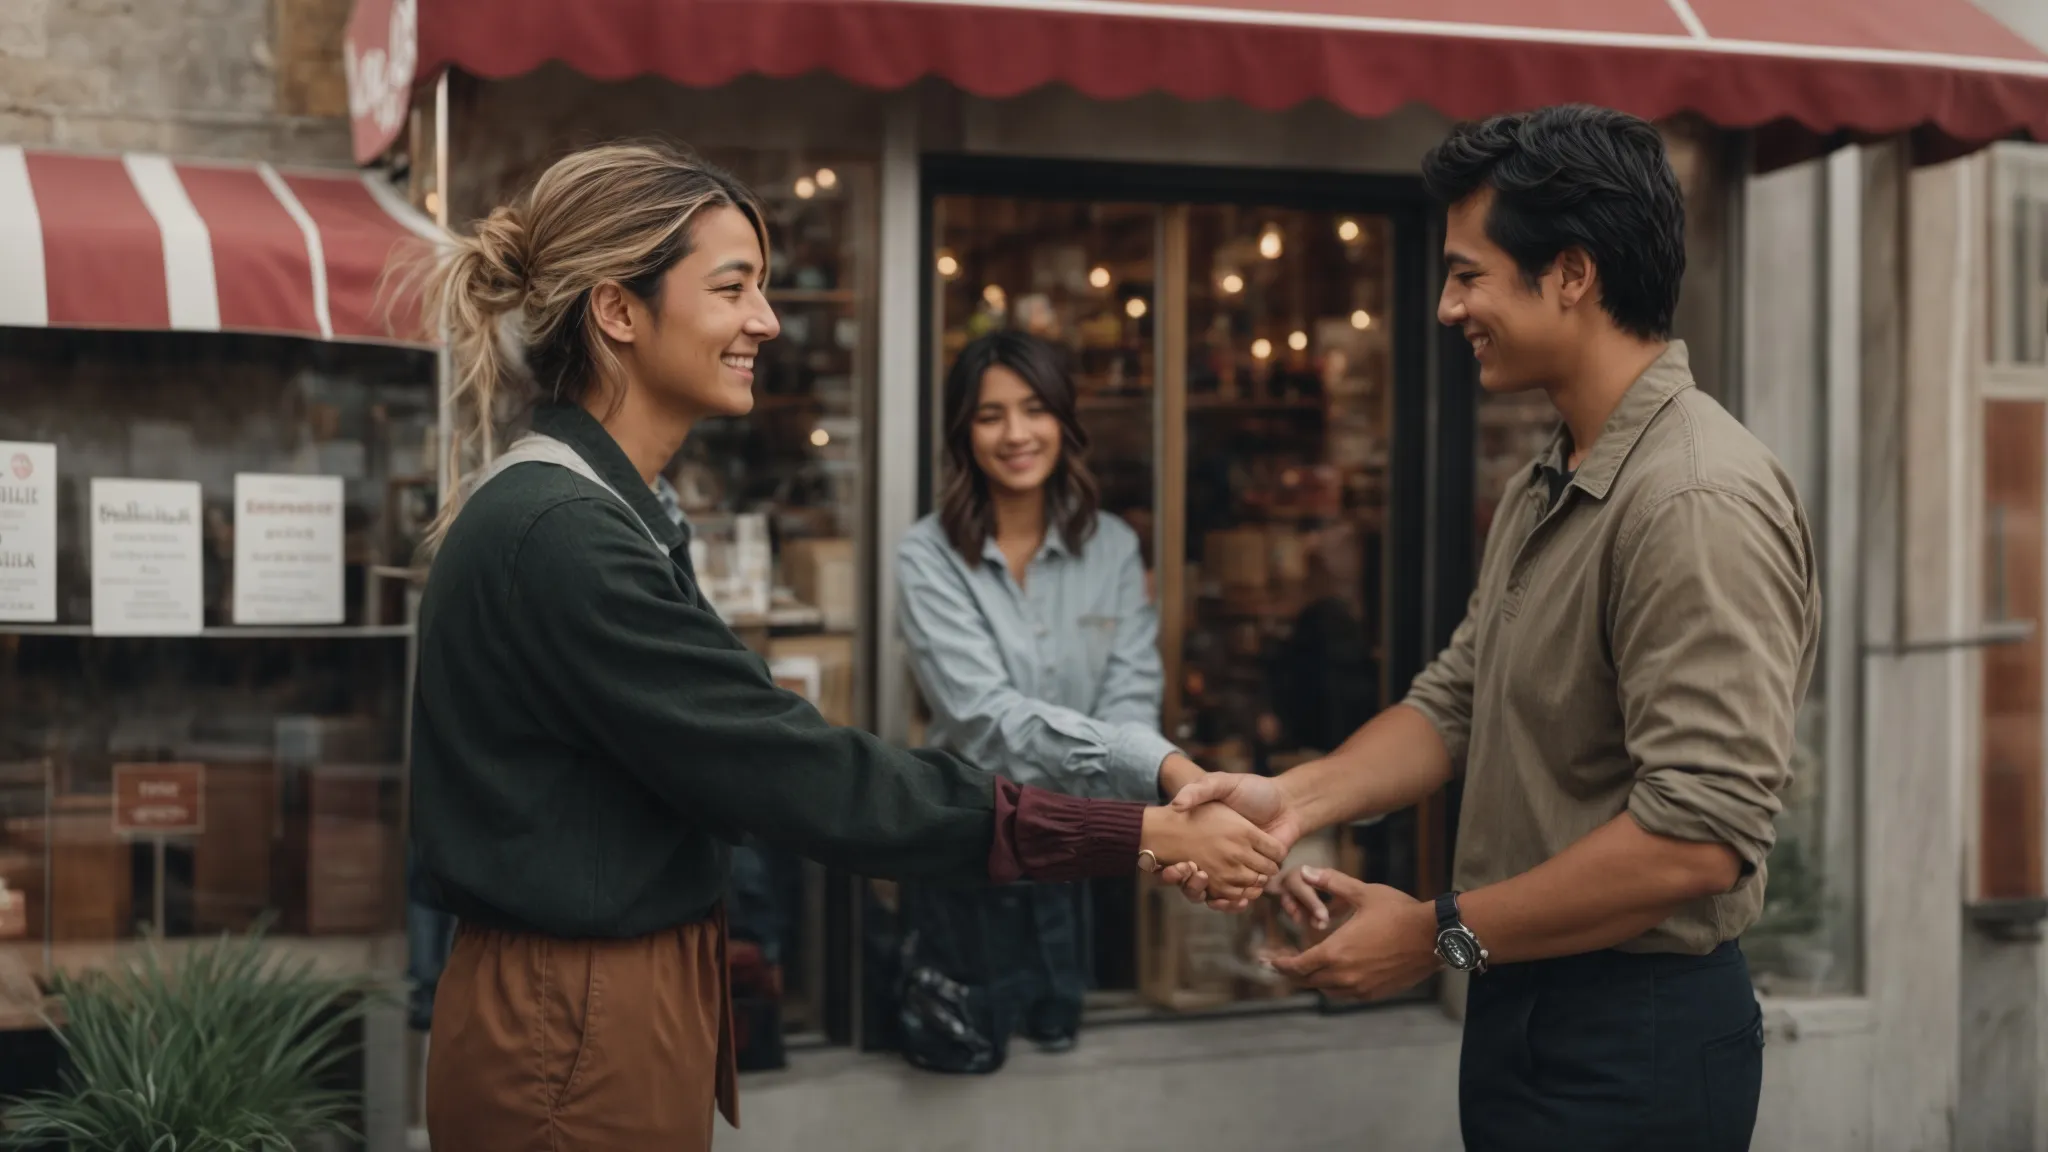 a satisfied customer shakes hands with a local business owner in front of a cozy storefront.